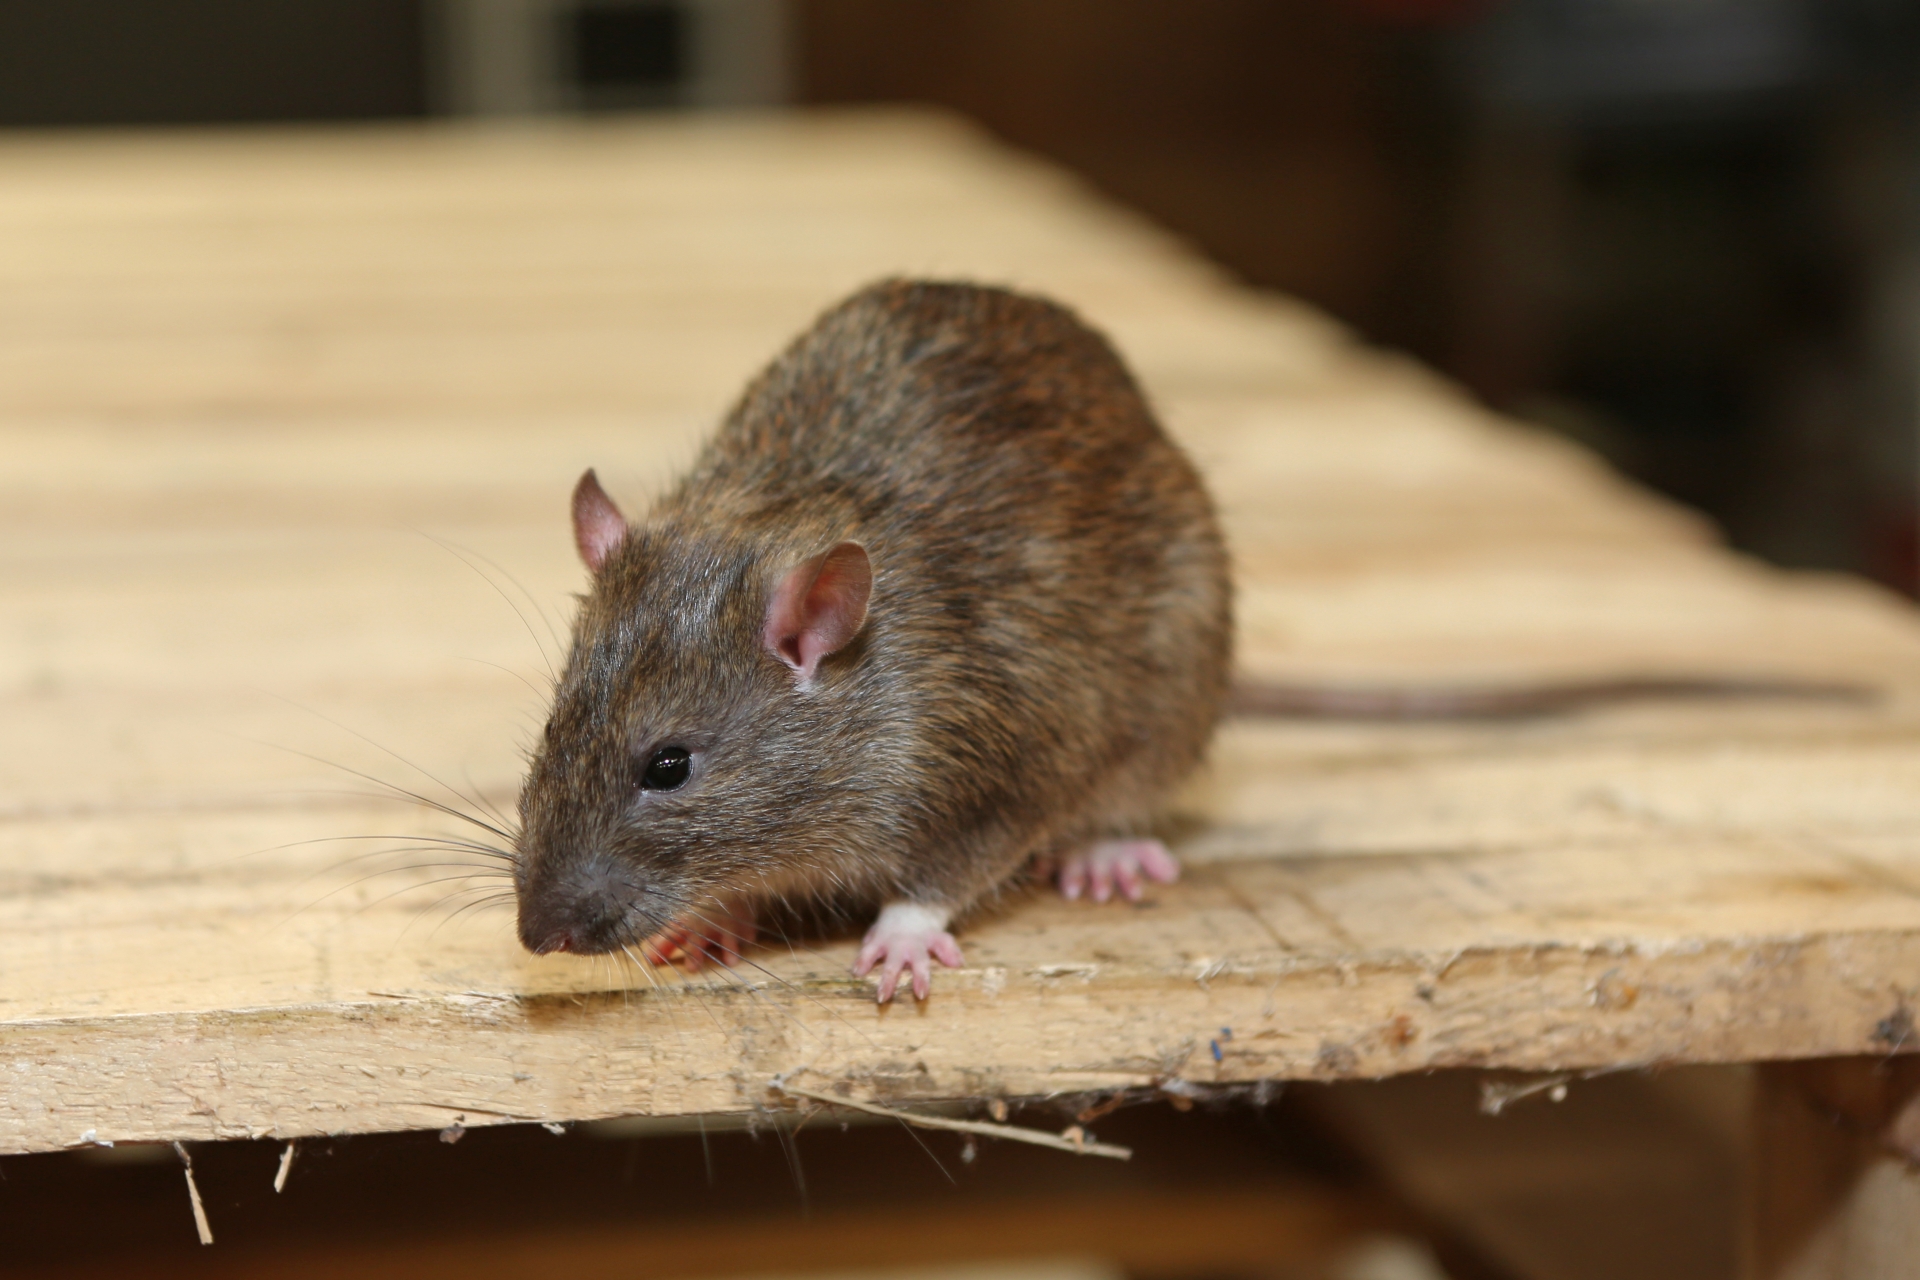 Rat extermination, Pest Control in Hammersmith, W6. Call Now 020 8166 9746